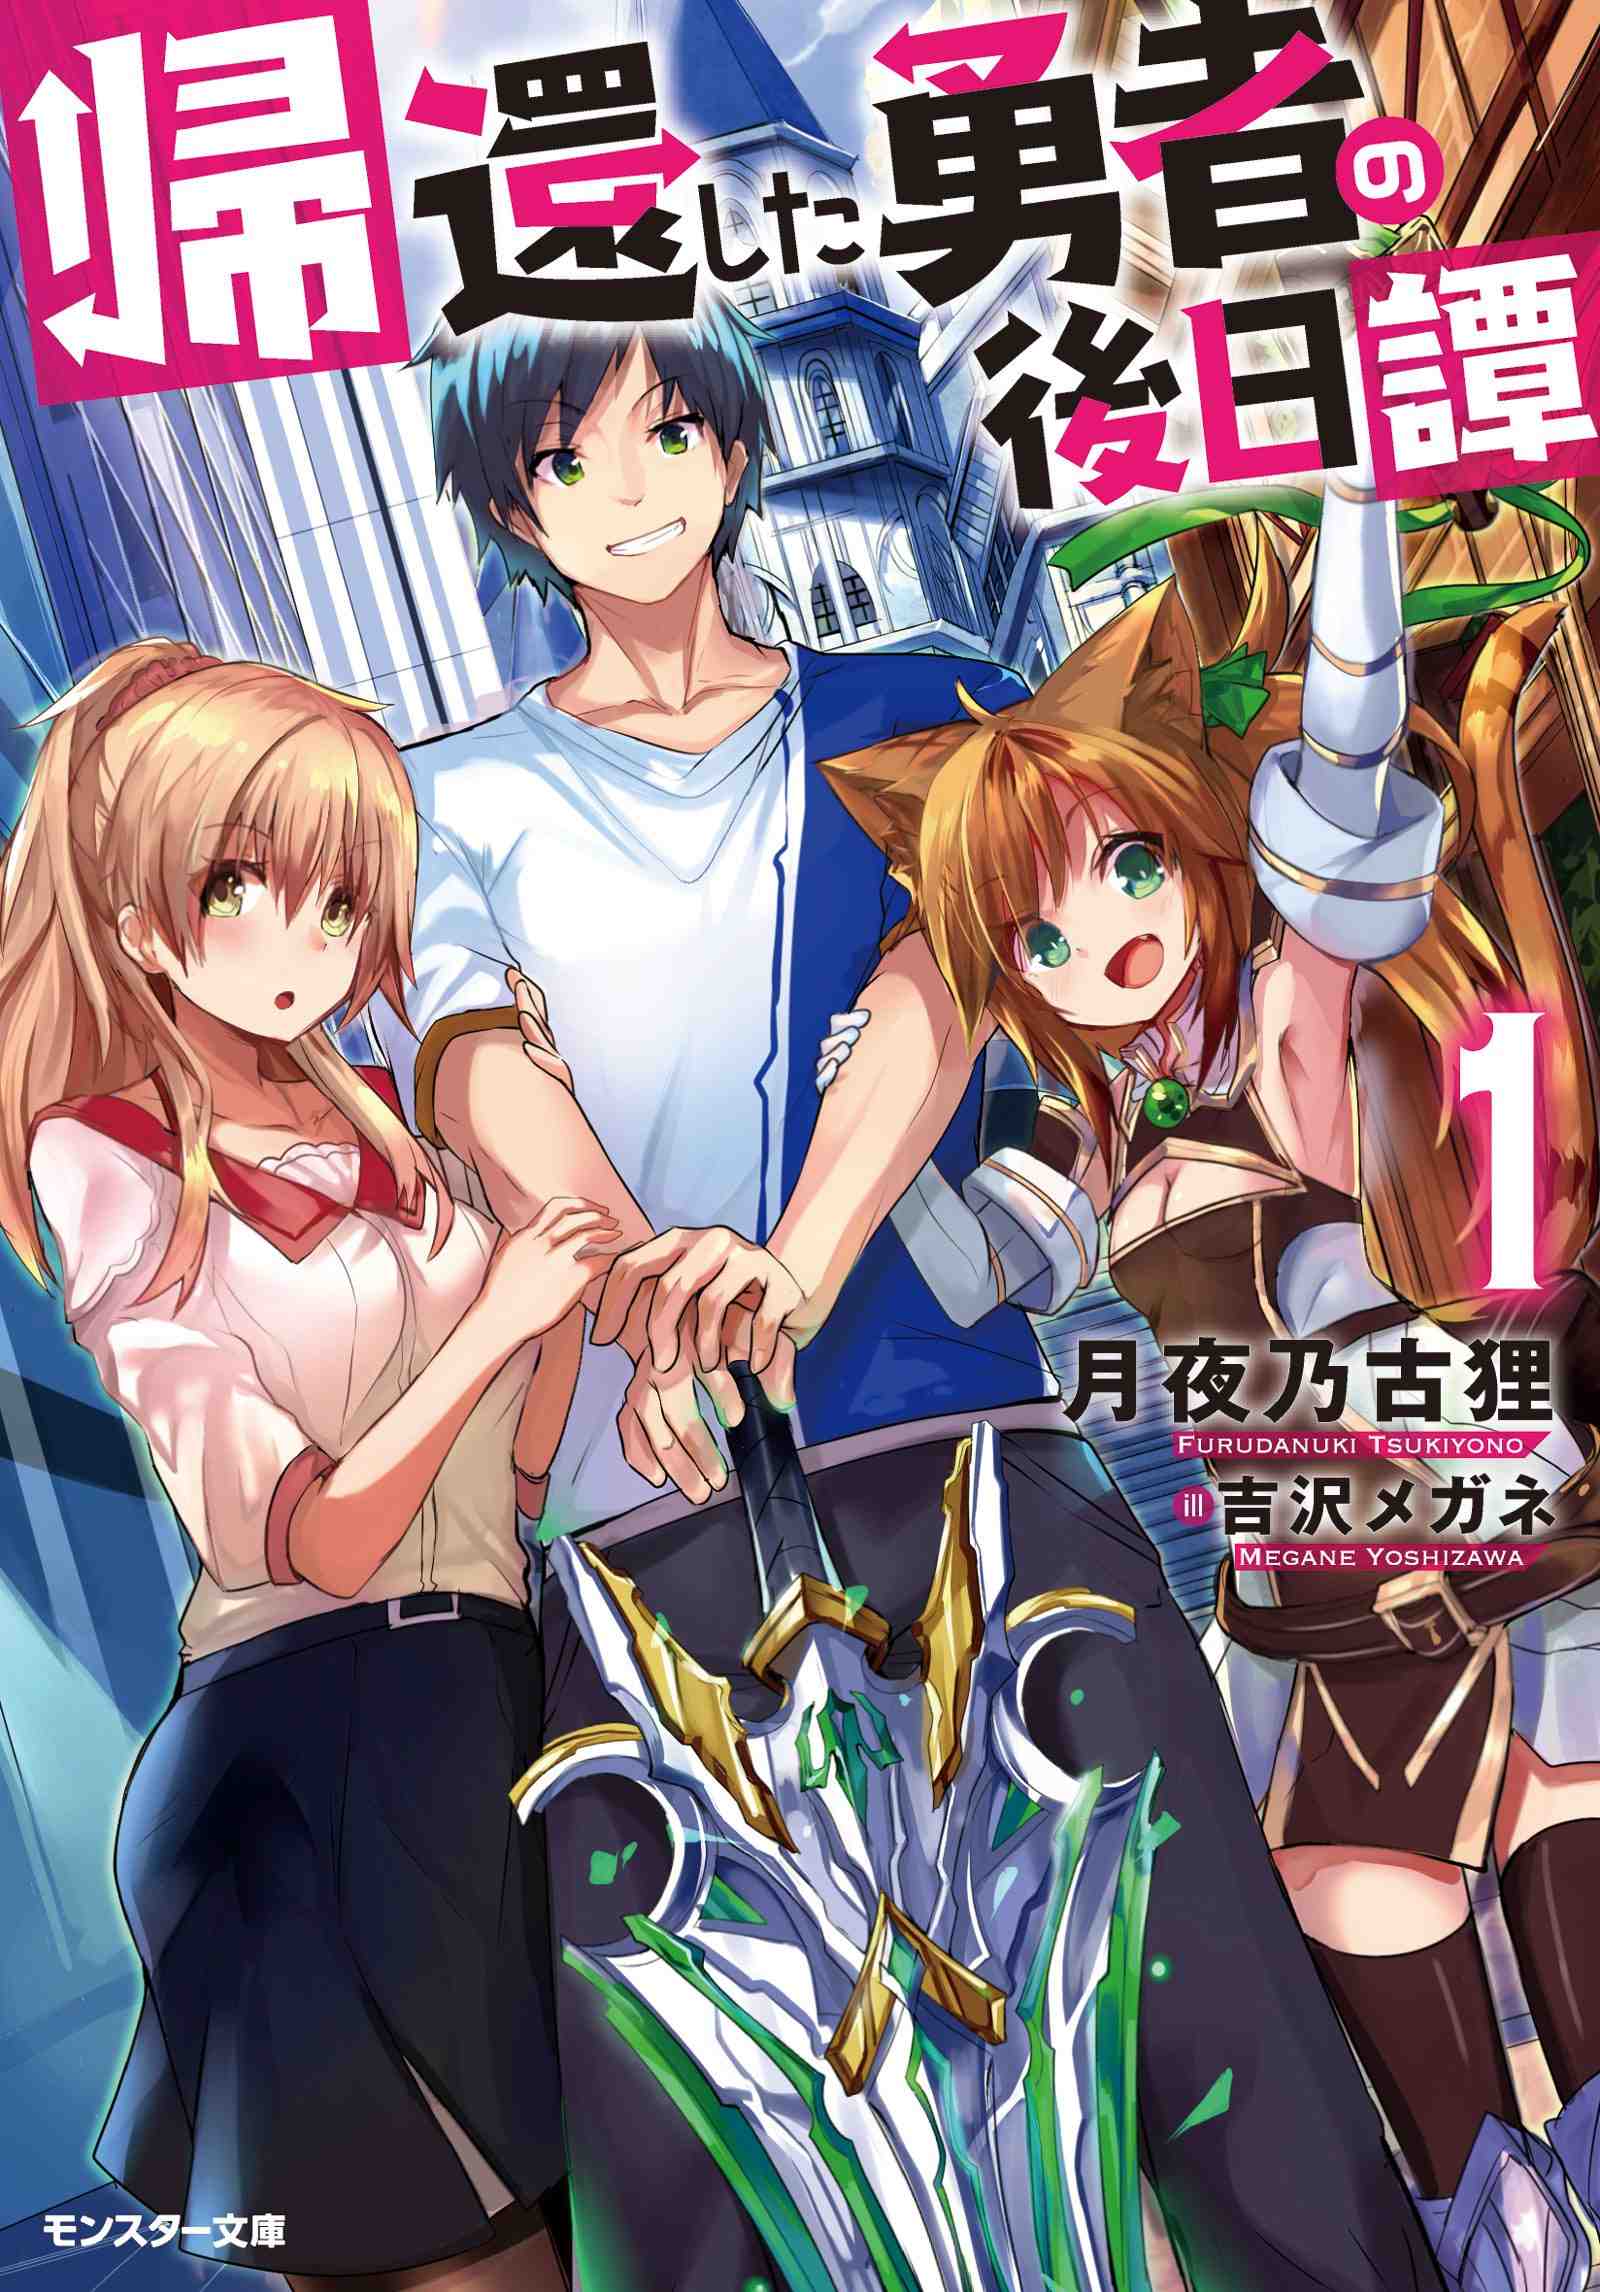 Read The Fate Of The Returned Hero Manga Latest Chapters